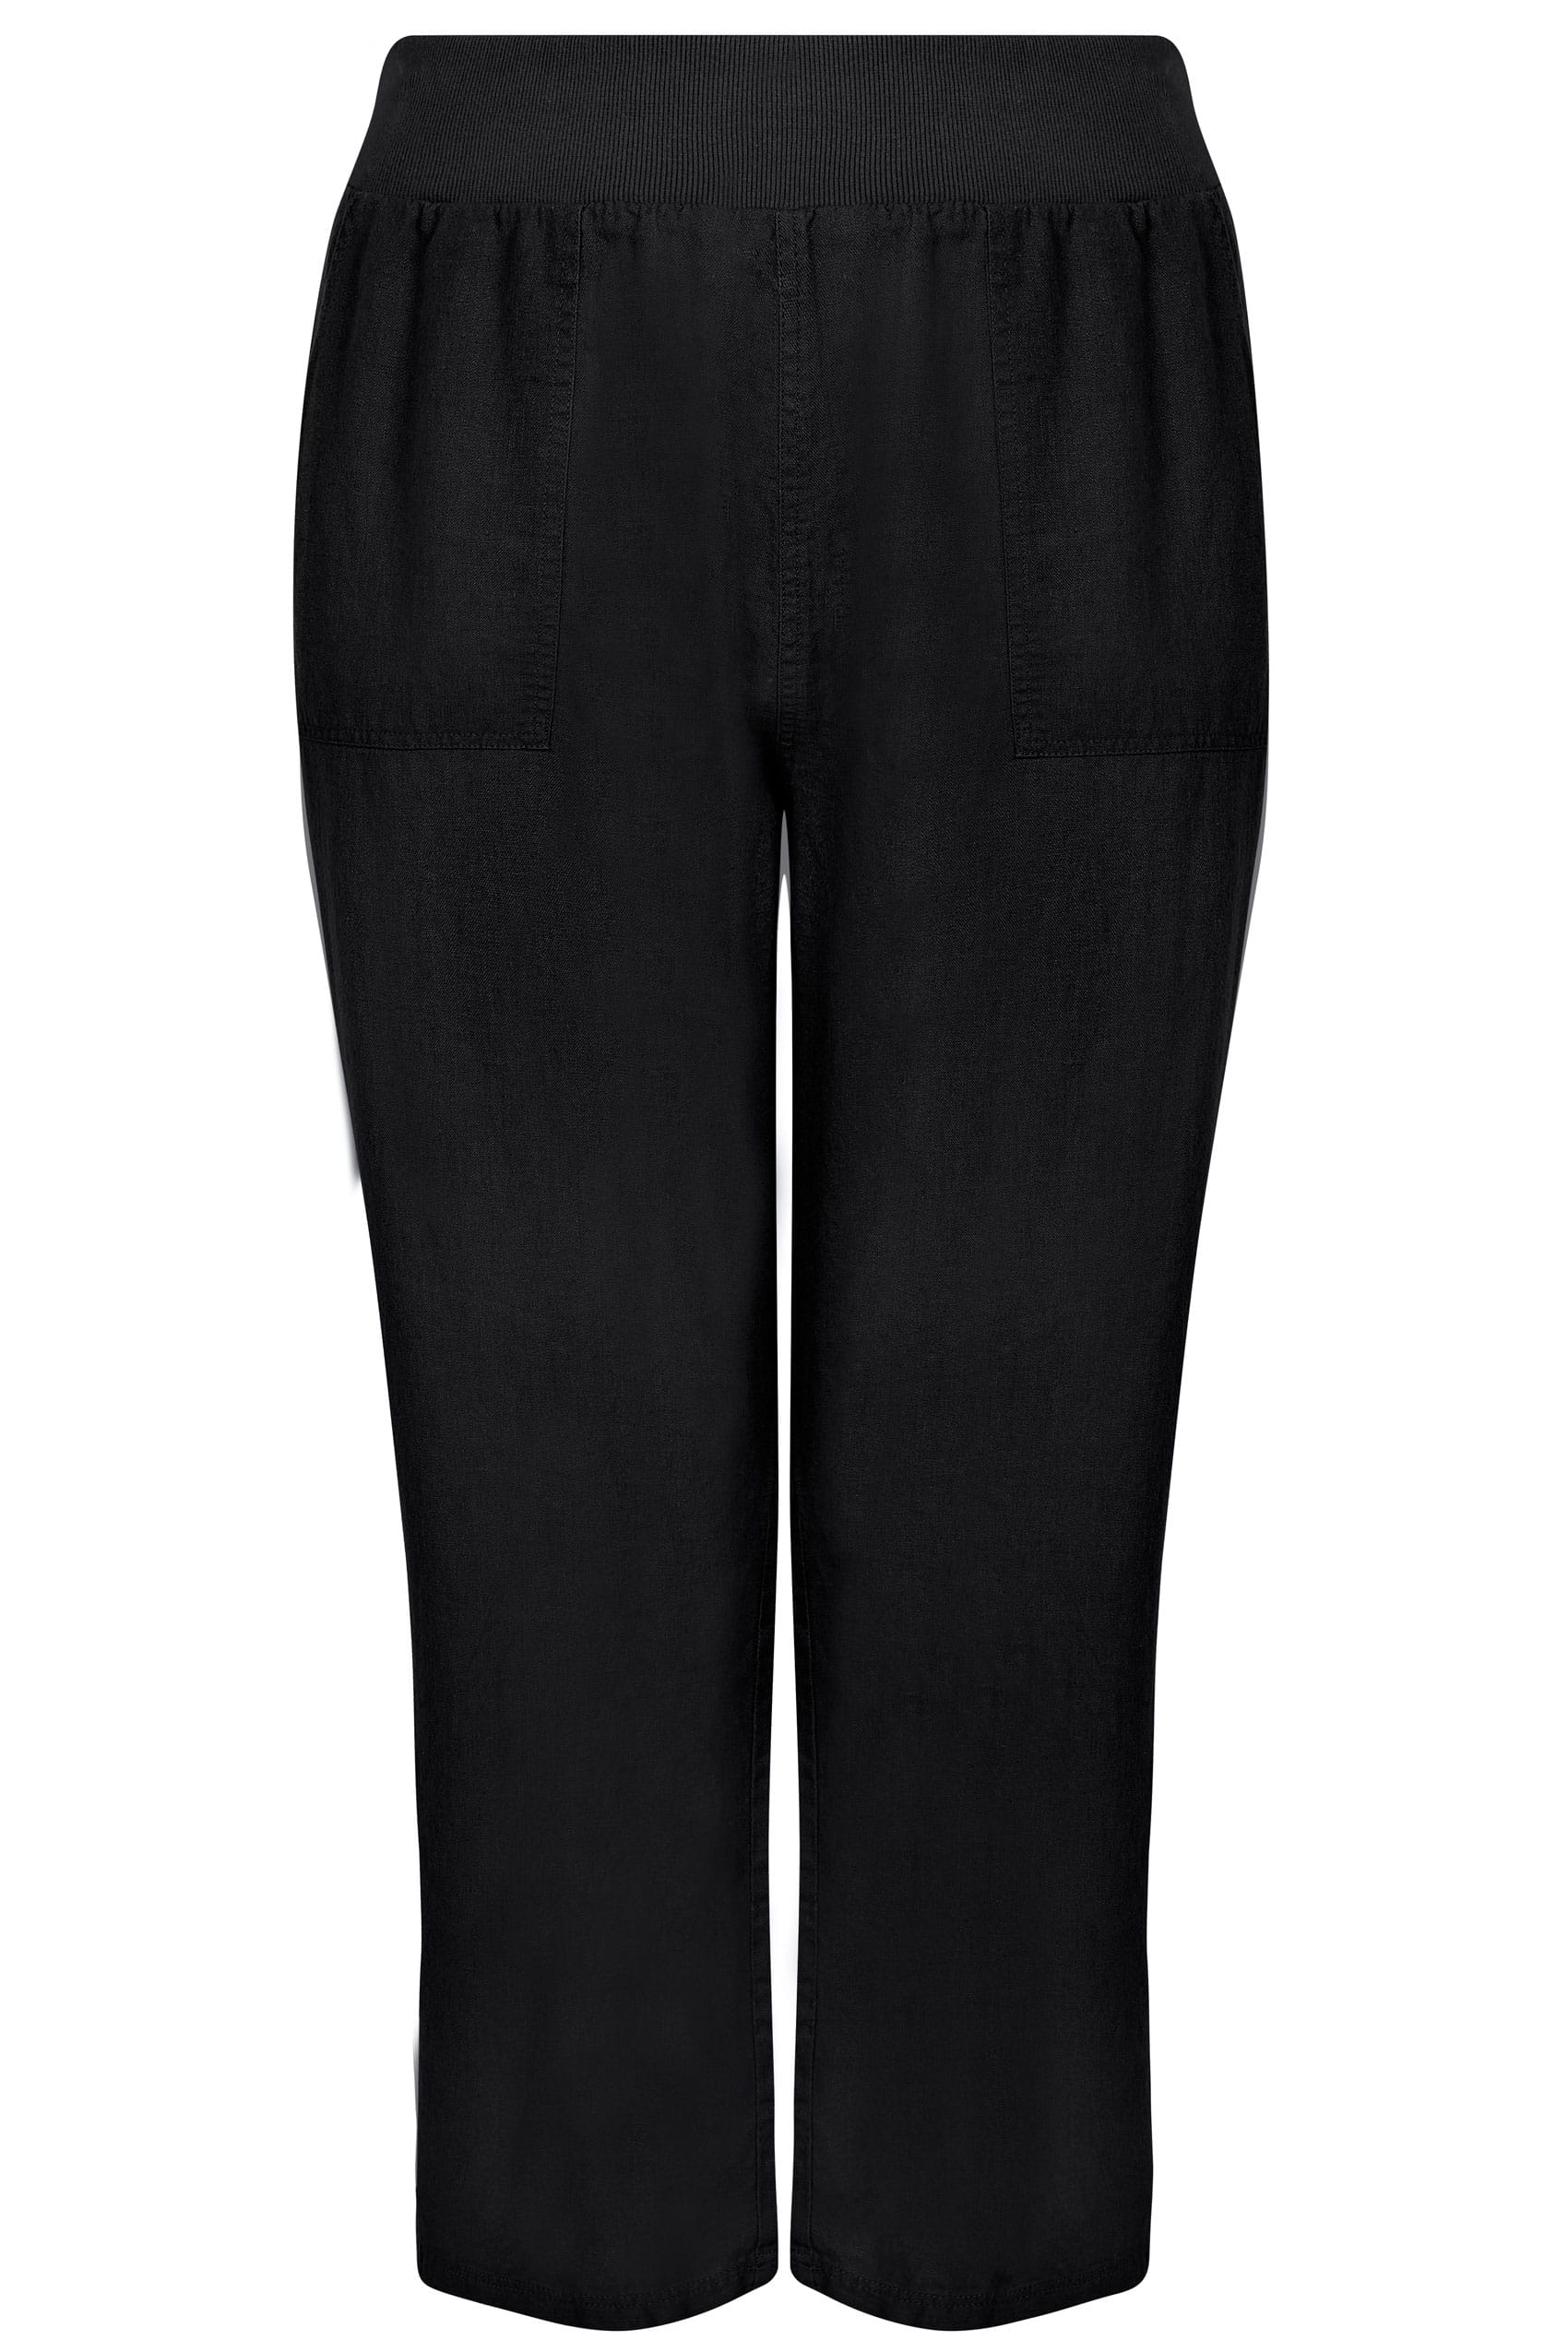 Black Linen Mix Pull On Wide Leg Trousers With Pockets, plus size 16 to ...